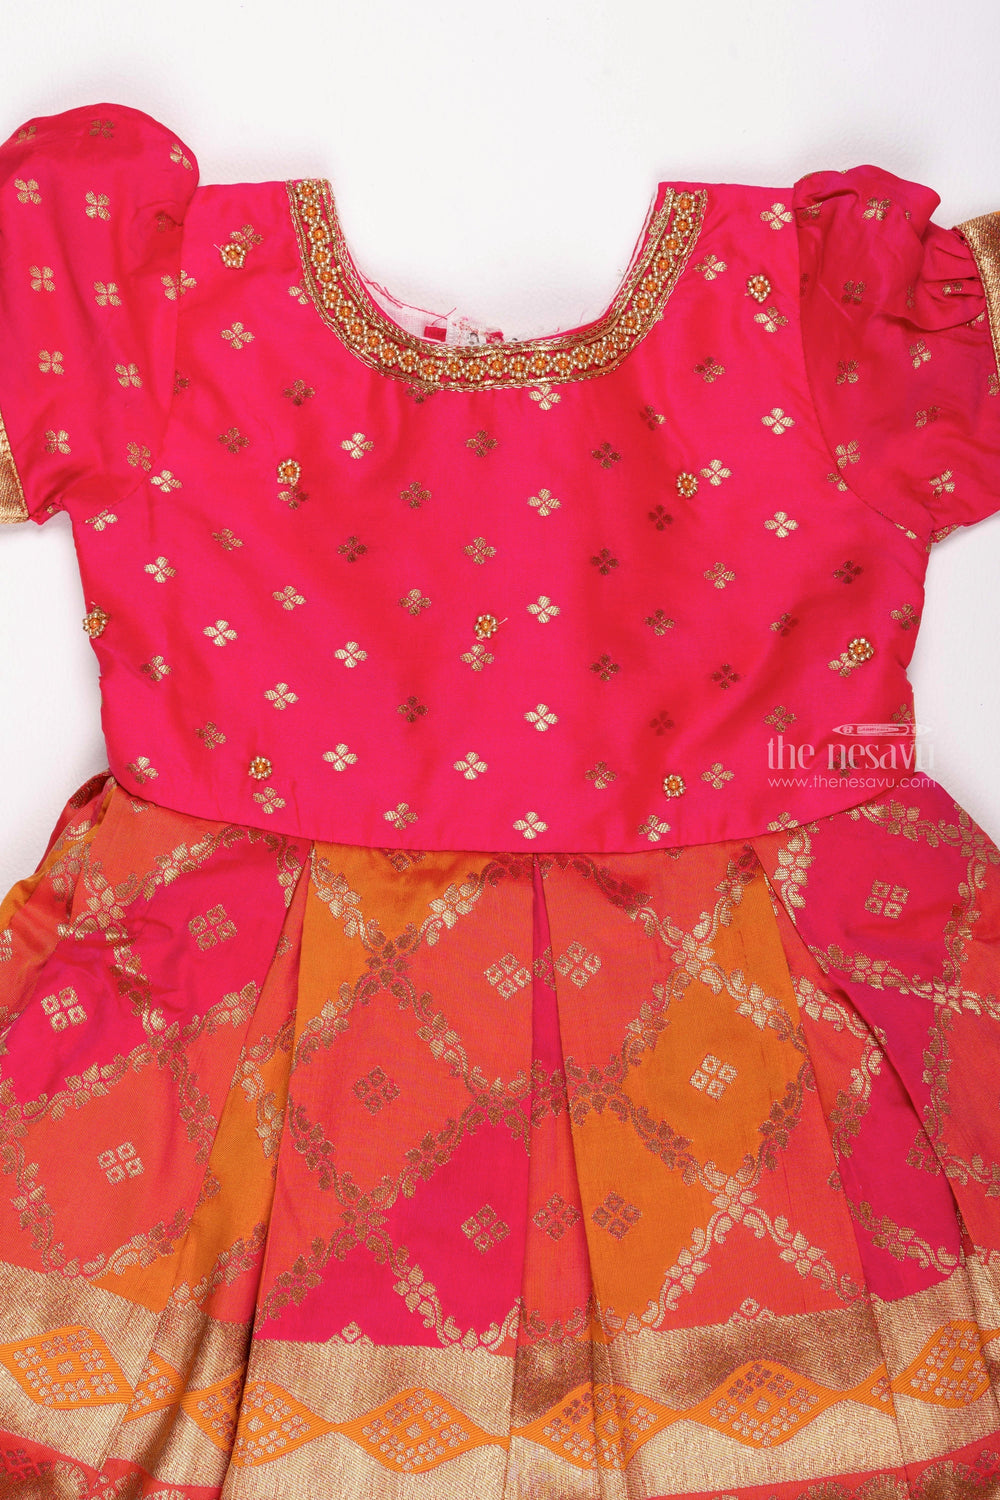 The Nesavu Silk Embroidered Frock Rosy Charm Radiance: Butta-Inspired Box-Pleated Silk Dress Highlighted with Zari Touches Nesavu Exclusive Designer Dresses Online | Traditional & Unique Silk Frock Designs | The Nesavu